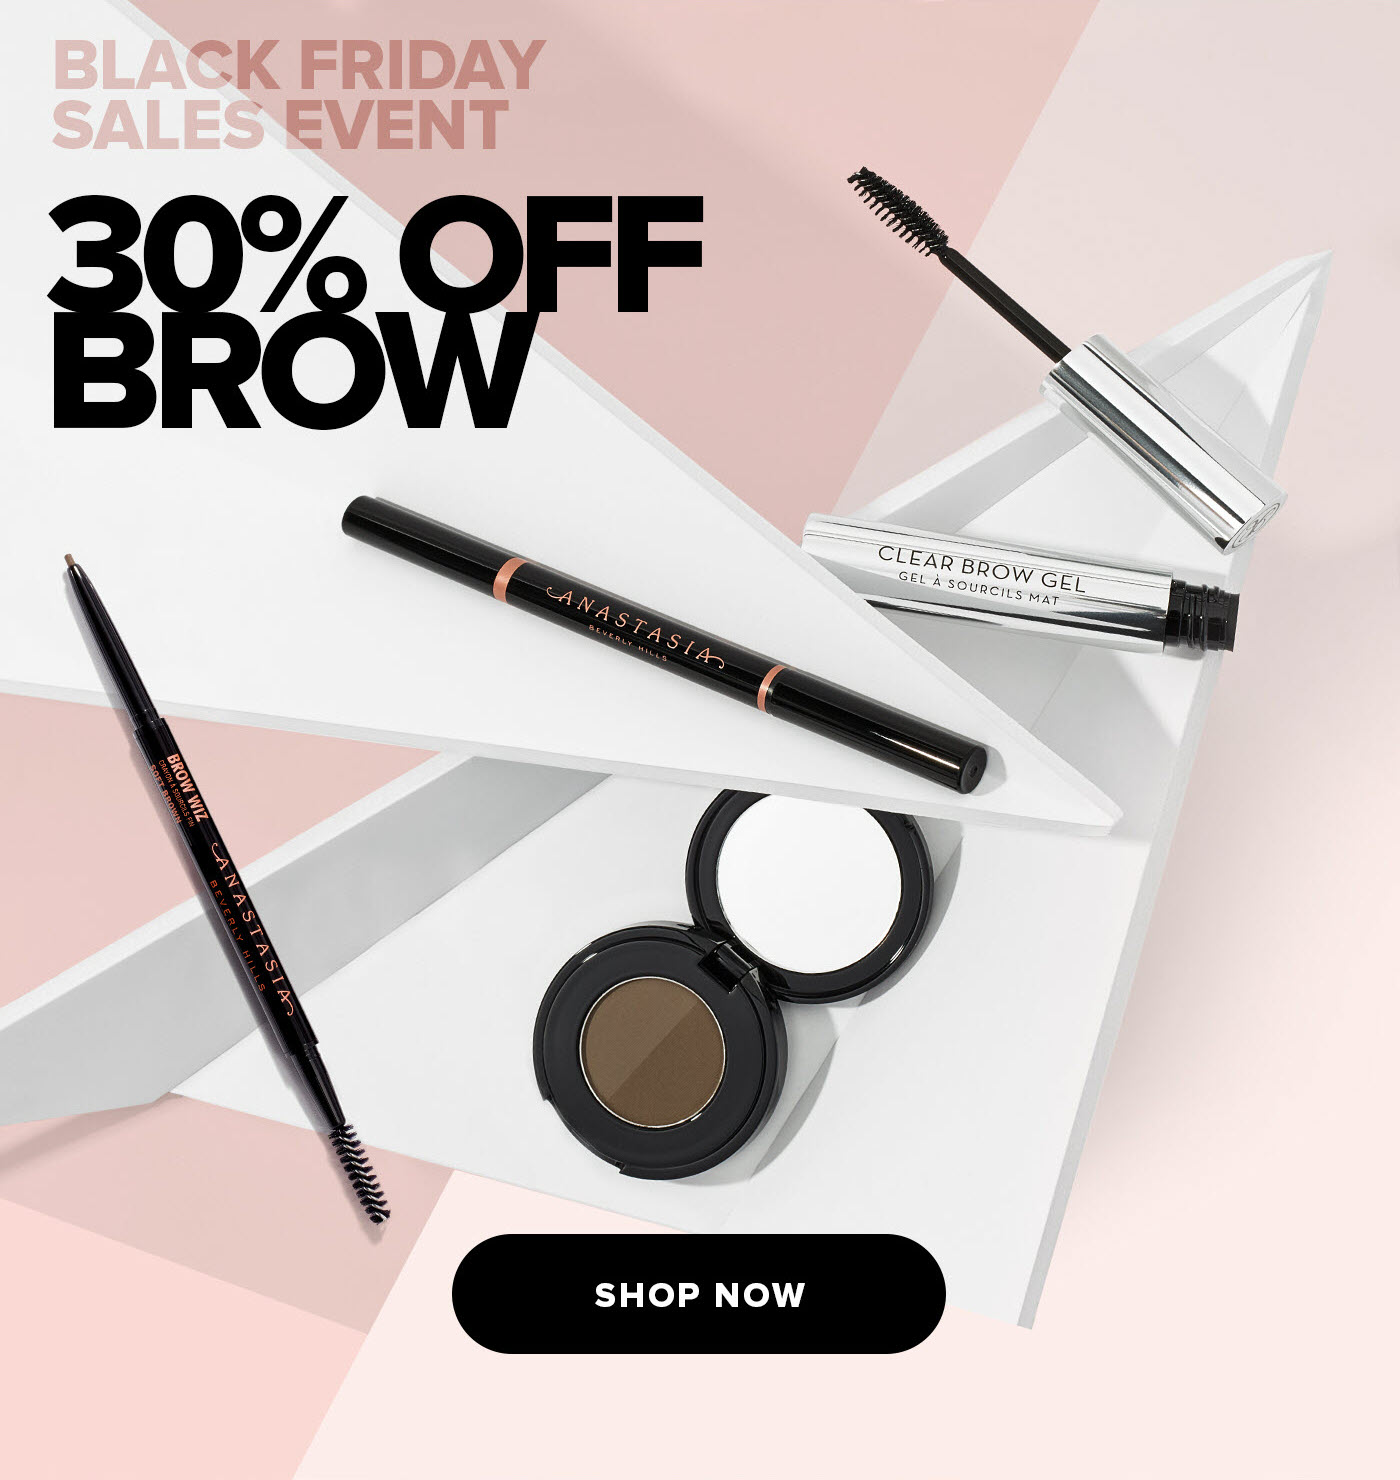 Our Brow Staples are NOW 30% OFF - Shop Now